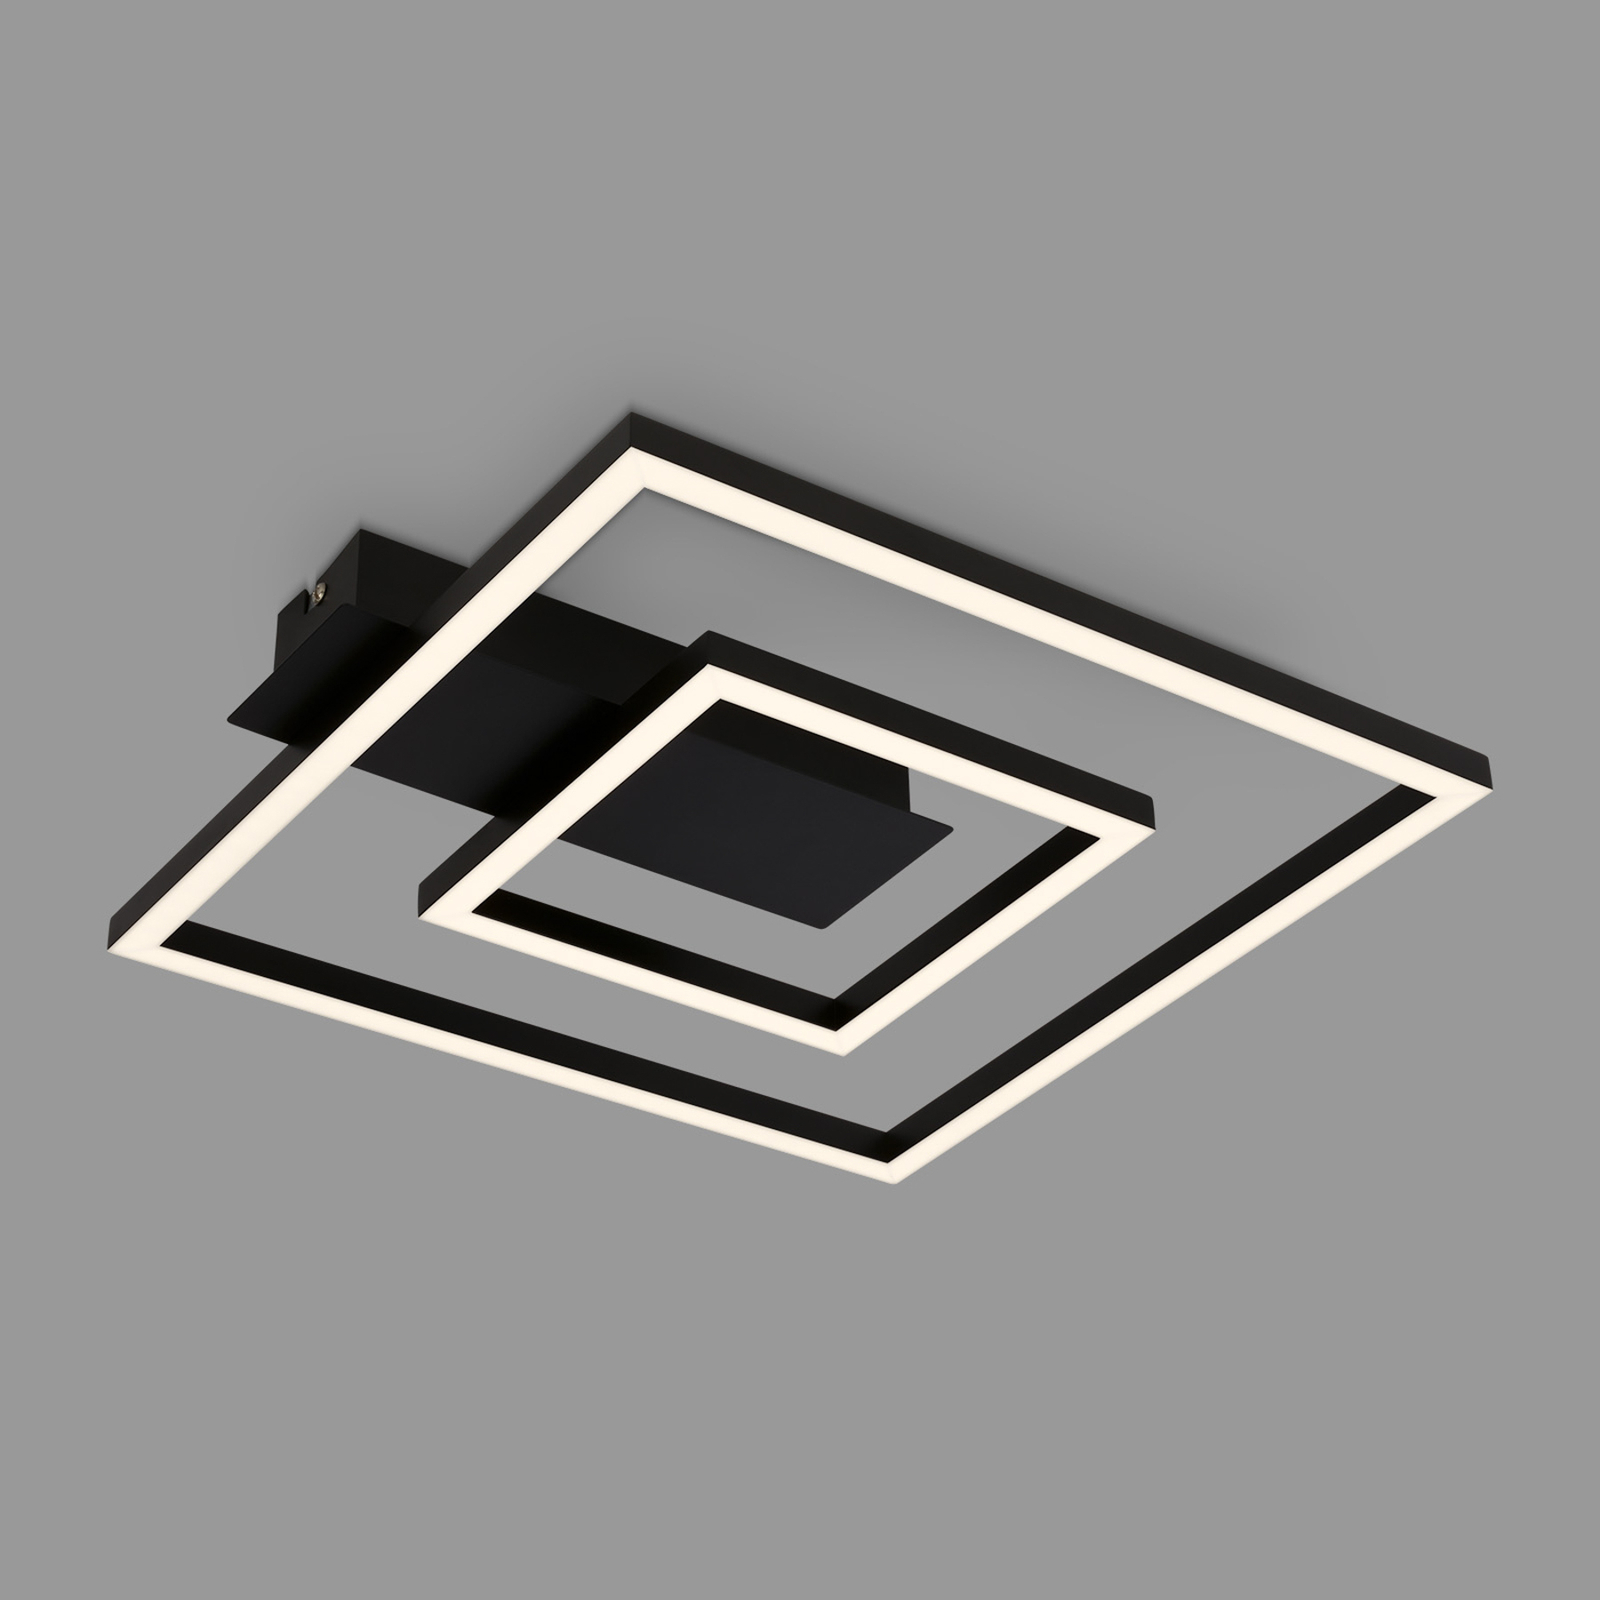 3772 LED ceiling light with two frames, black